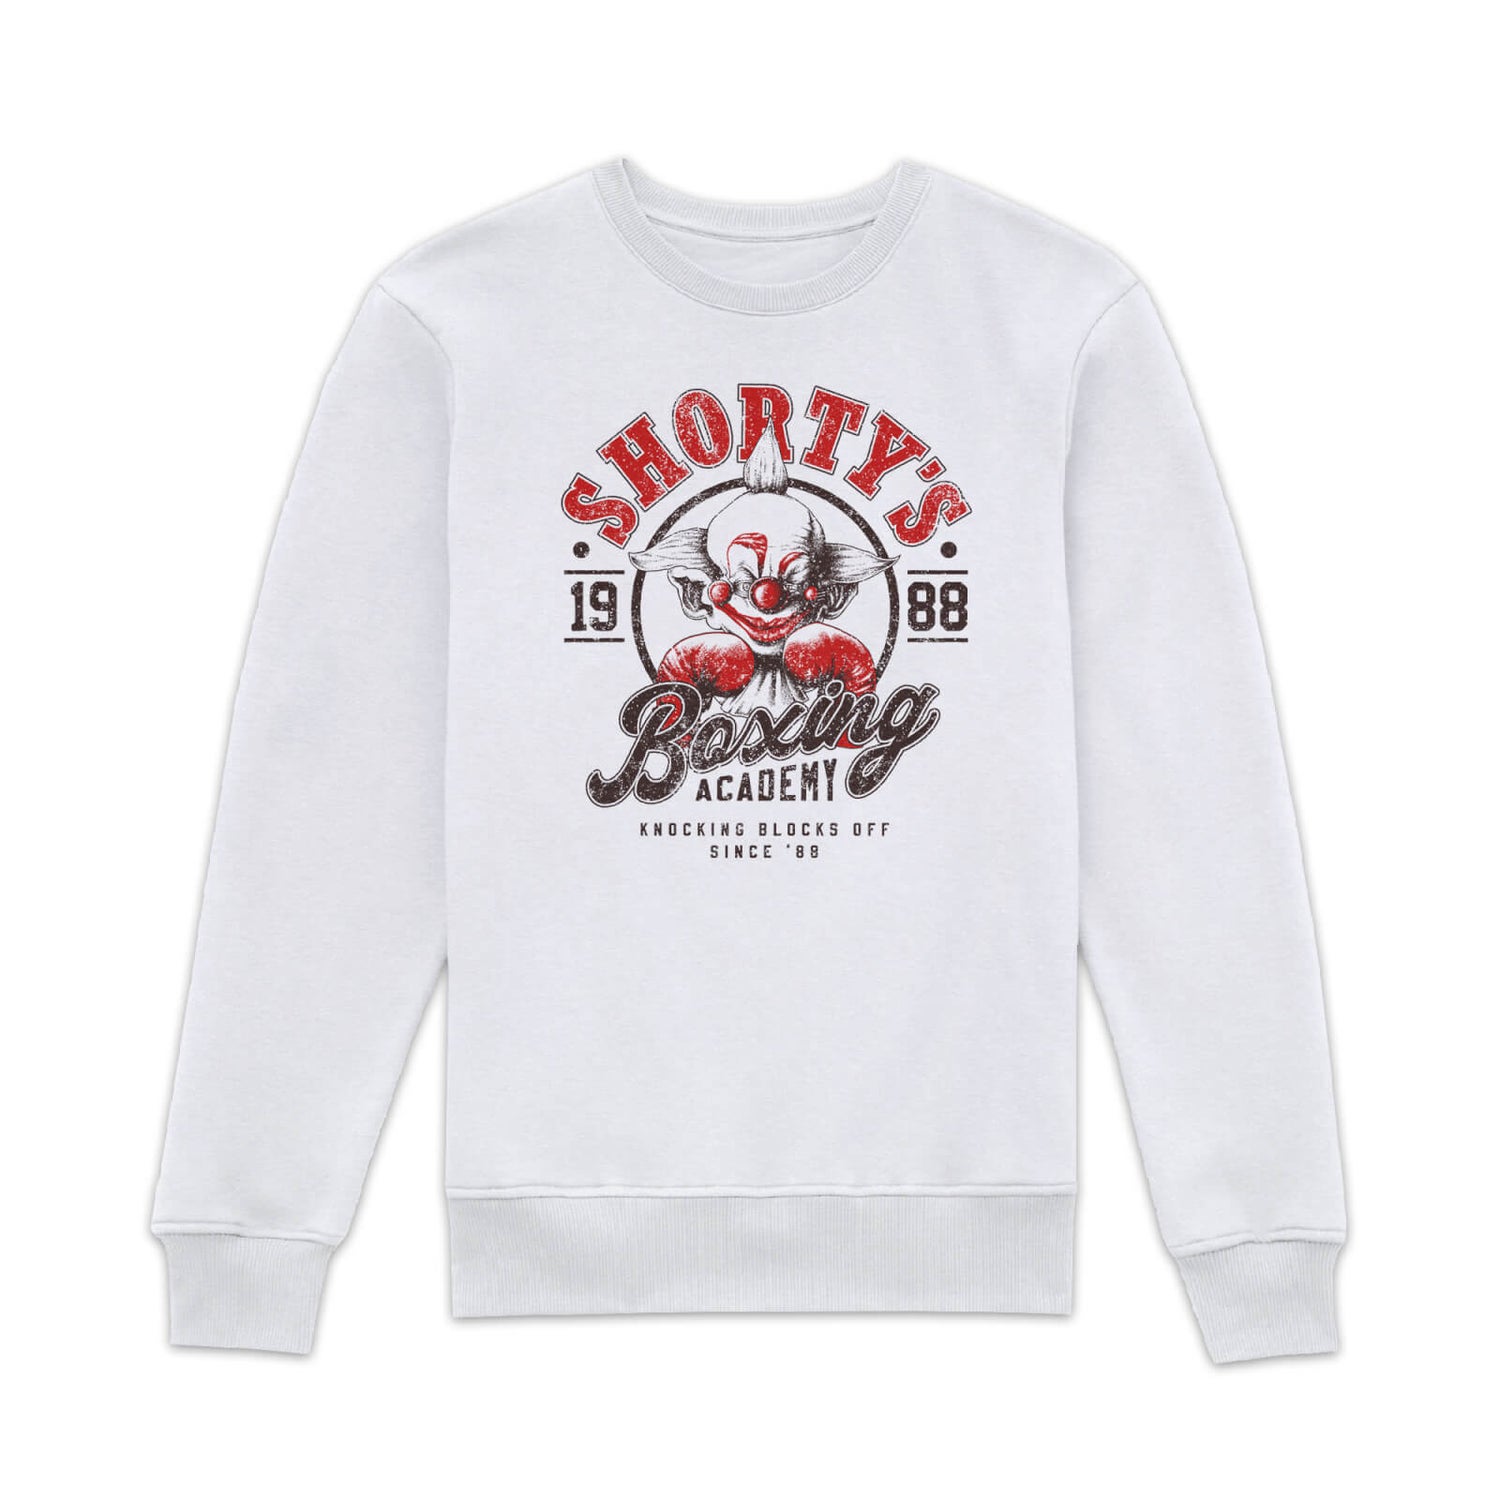 Killer Klowns From Outer Space Shorty's Boxing Gym Sweatshirt - White